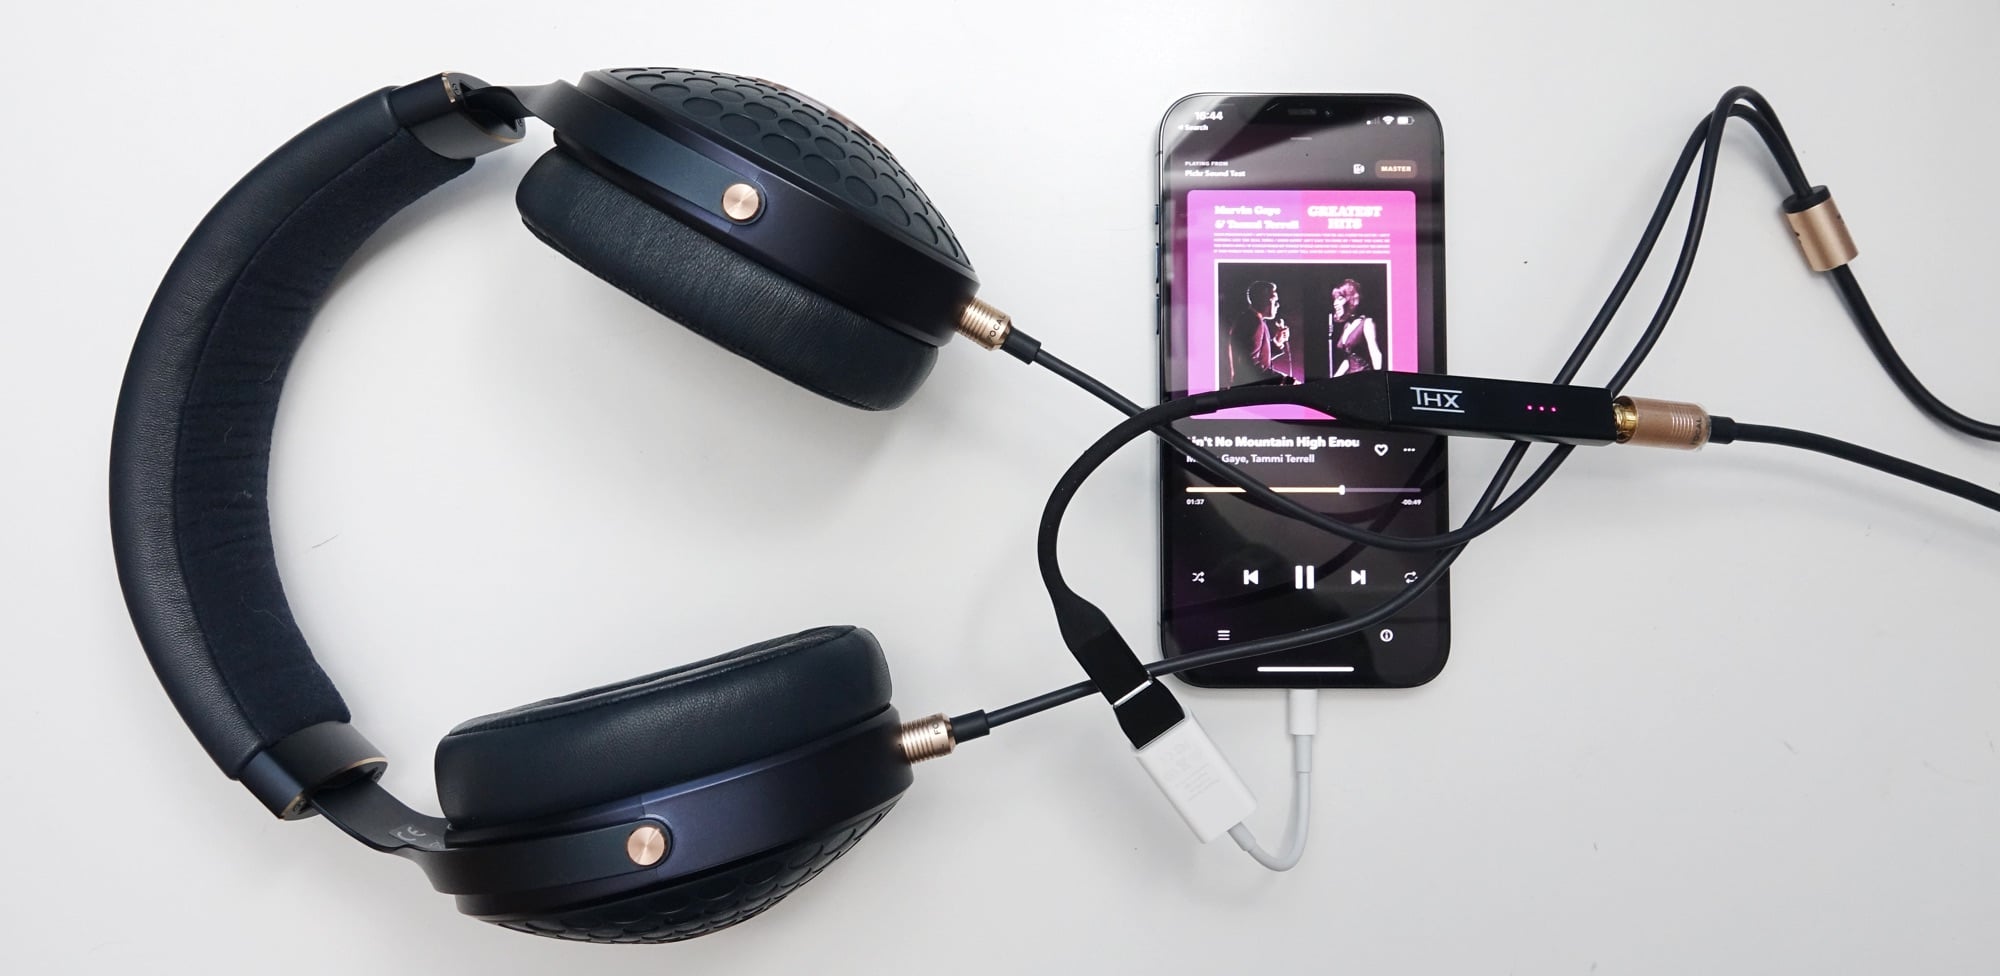 Focal Celestee headphones plugged into the THX Onyx USB DAC and into an iPhone 12 Pro Max